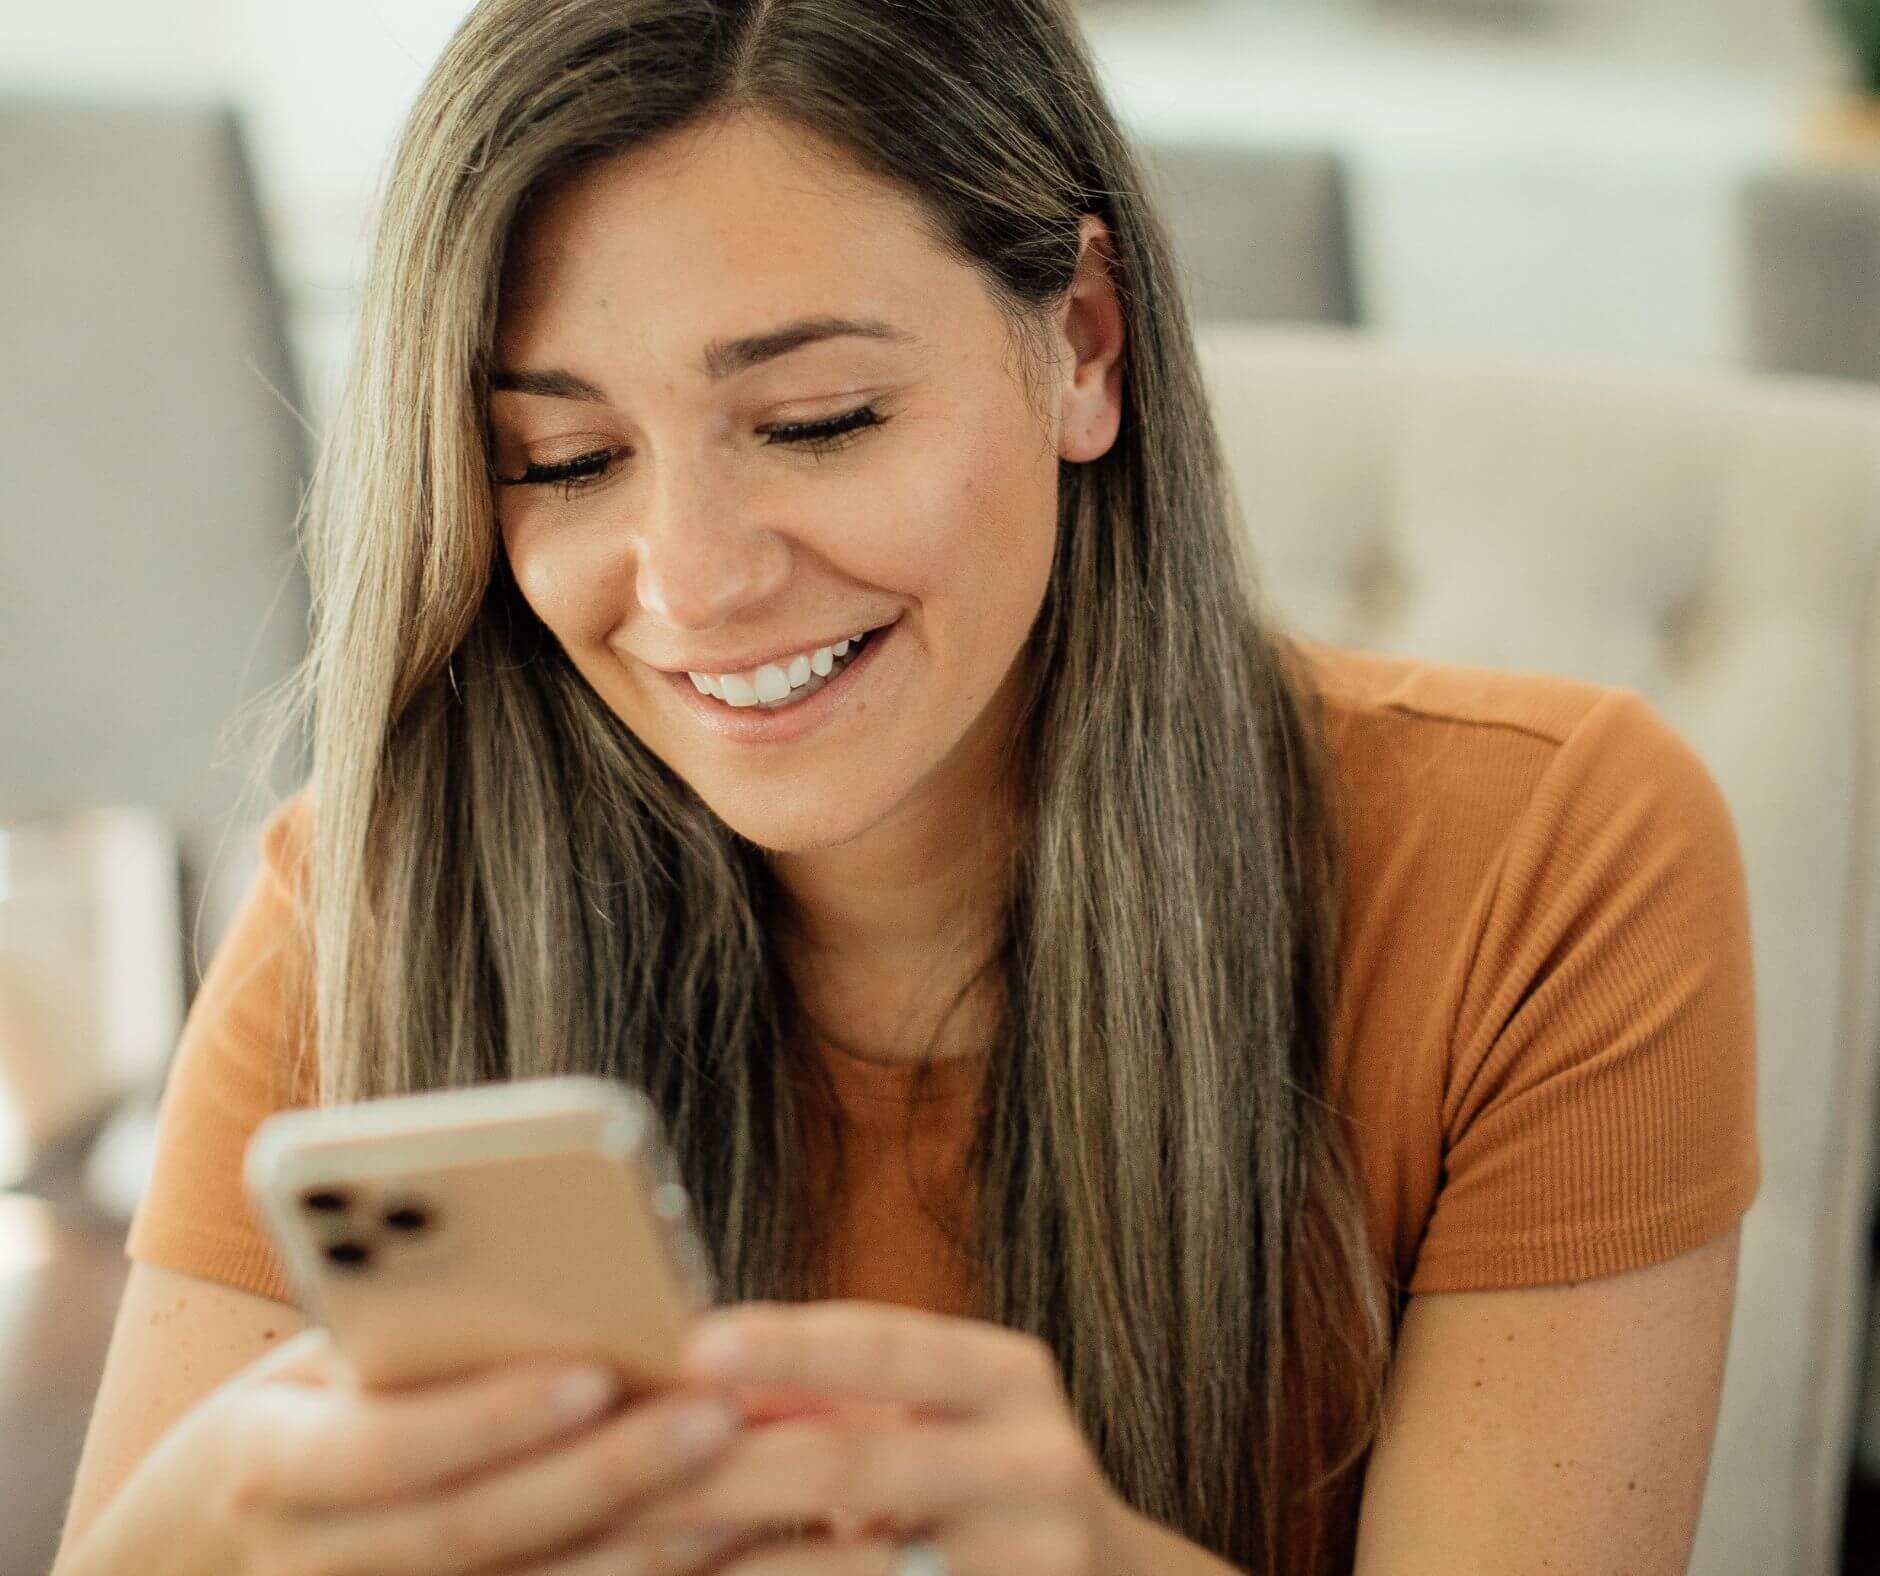 Woman laughing on mobile as she reads web design strategy tips